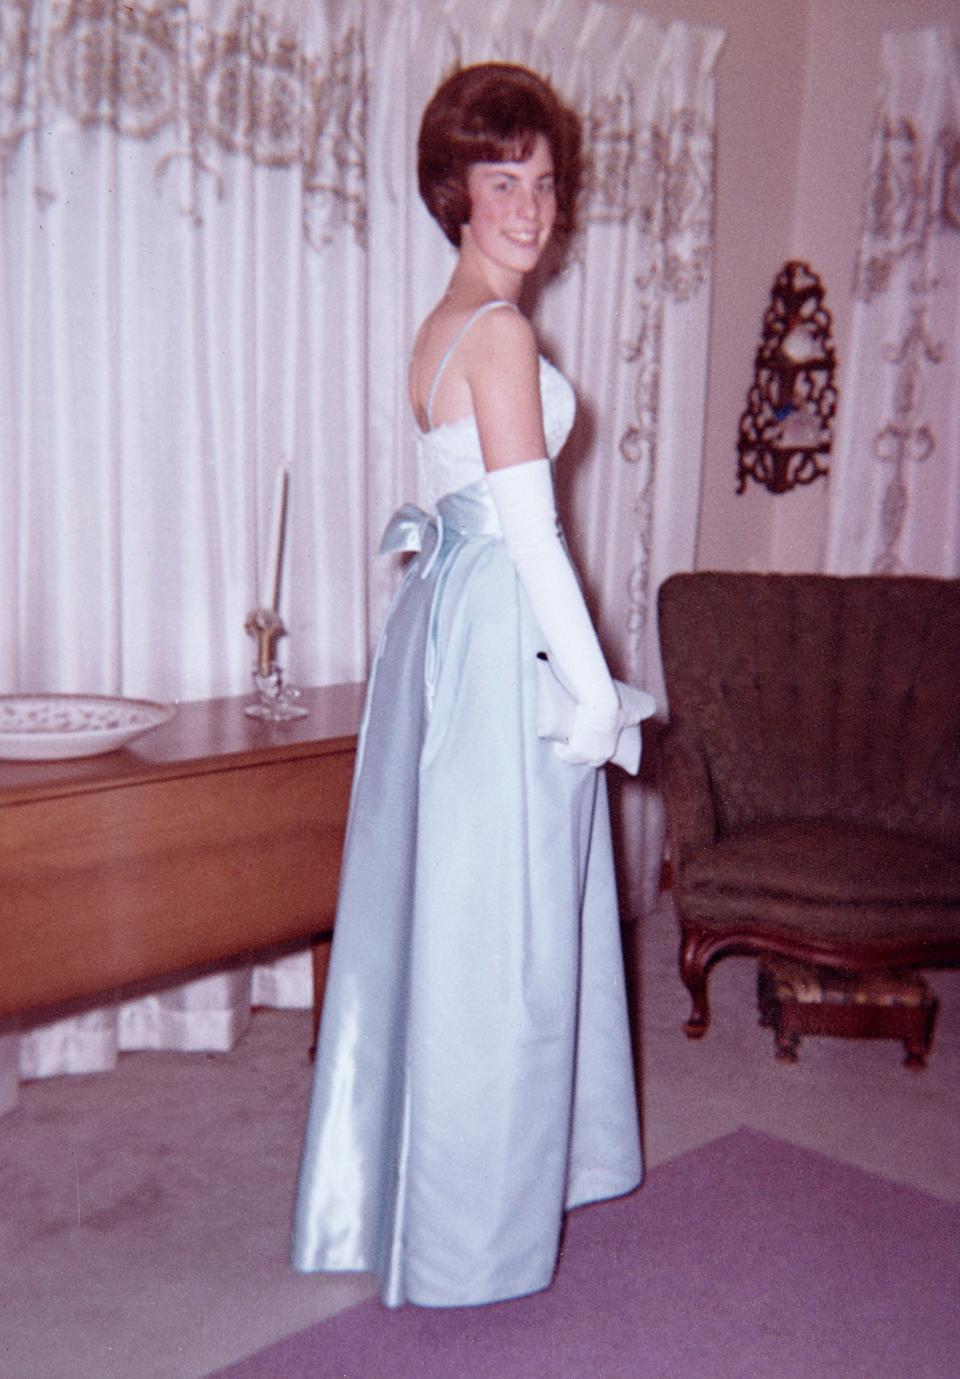 A vintage family photo of teenager in prom dress circa 1964.